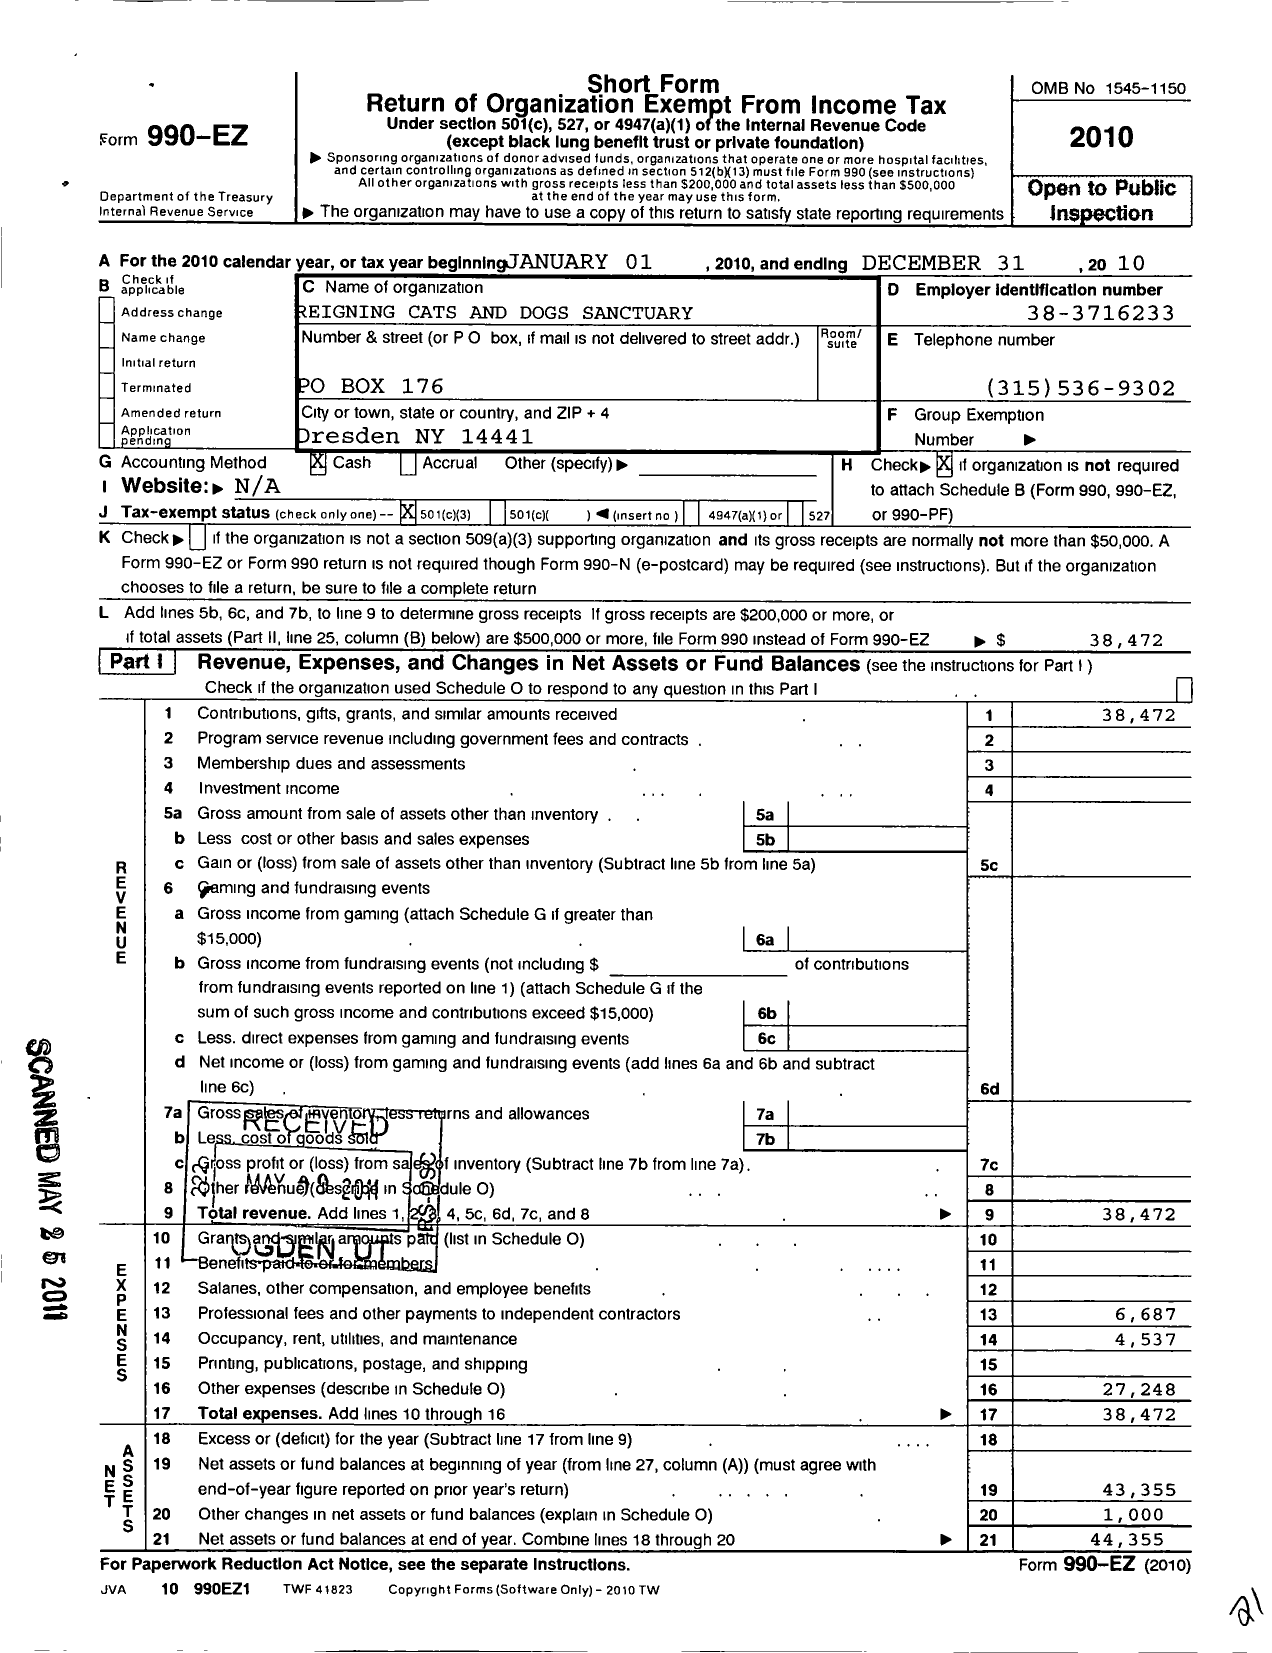 Image of first page of 2010 Form 990EZ for Reigning Cats and Dogs Sanctuary